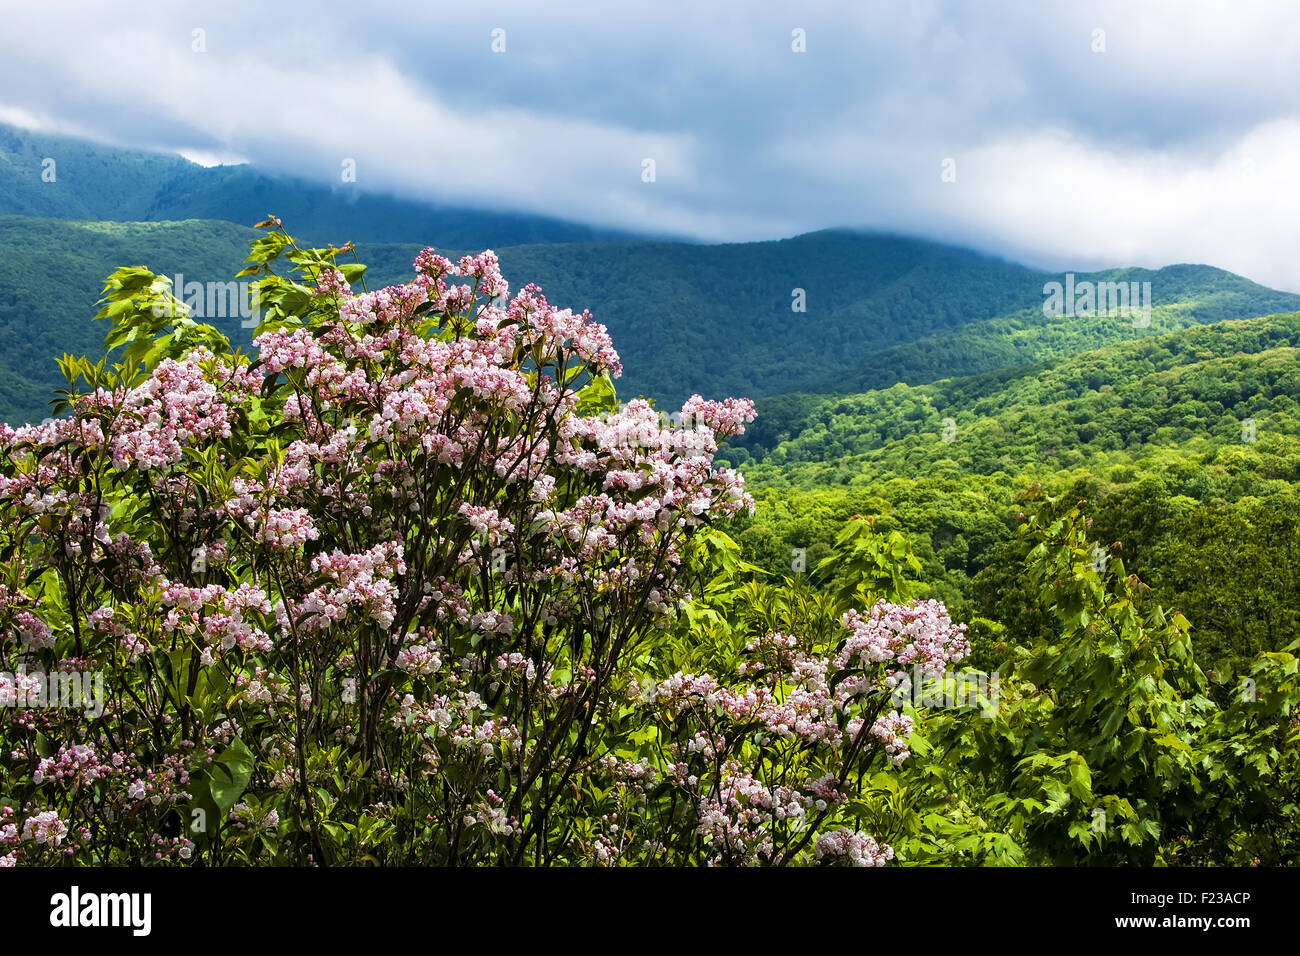 View from the Blue Ridge Parkway of the Smoky and Blue Ridge Mountains in North Carolina. Stock Photo